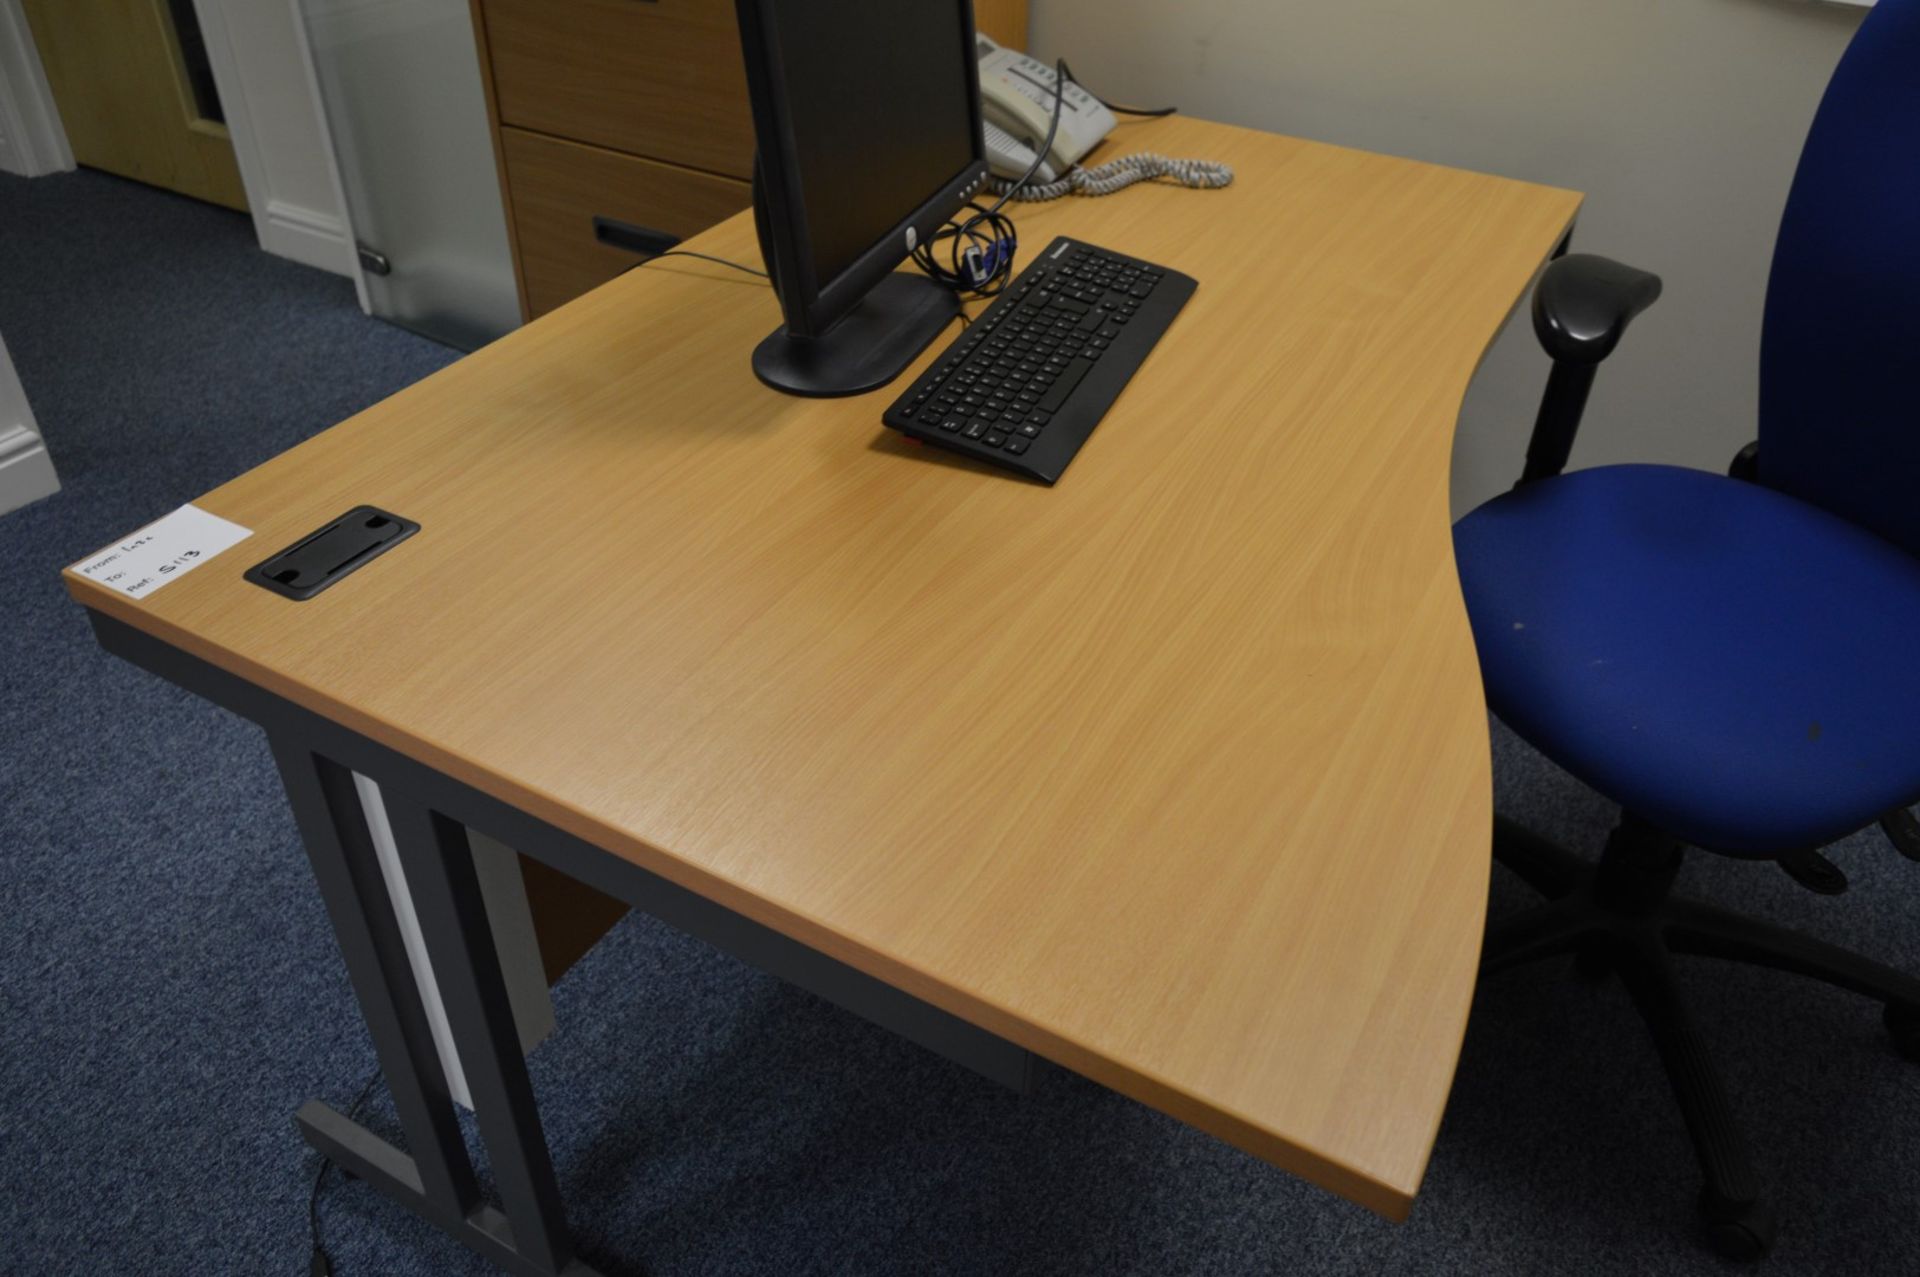 1 x Office Desk With Beech Top, Grey Coated Steel Frame and Blue Office Swivel Chair - H72 x W140 - Image 3 of 4